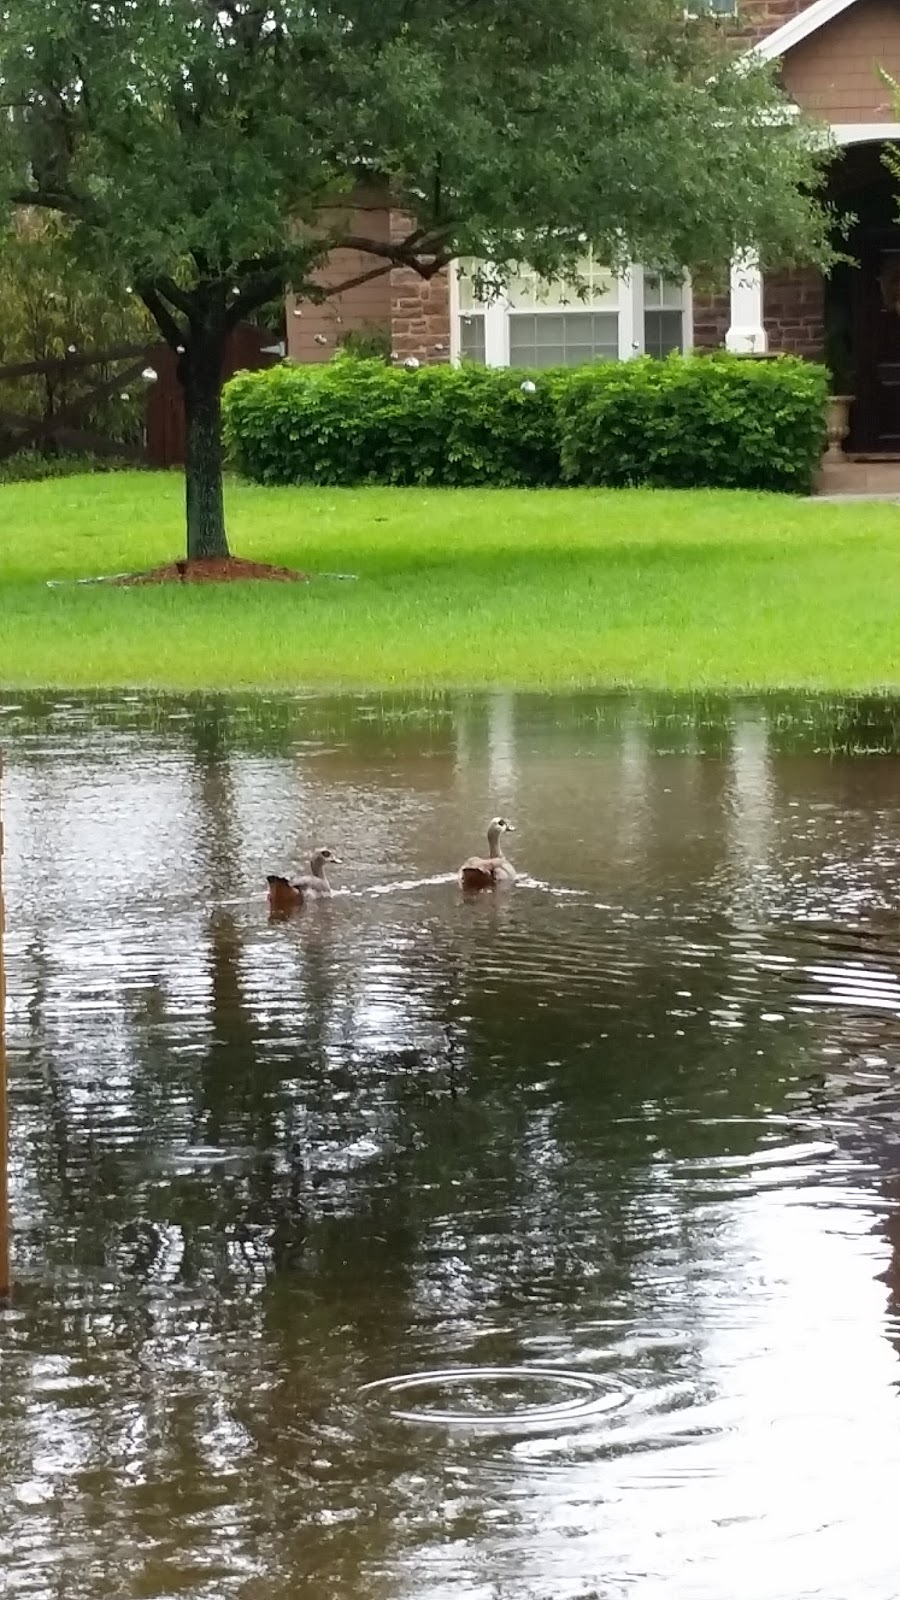 Eclectic Red Barn: Ducks swimming in my driveway